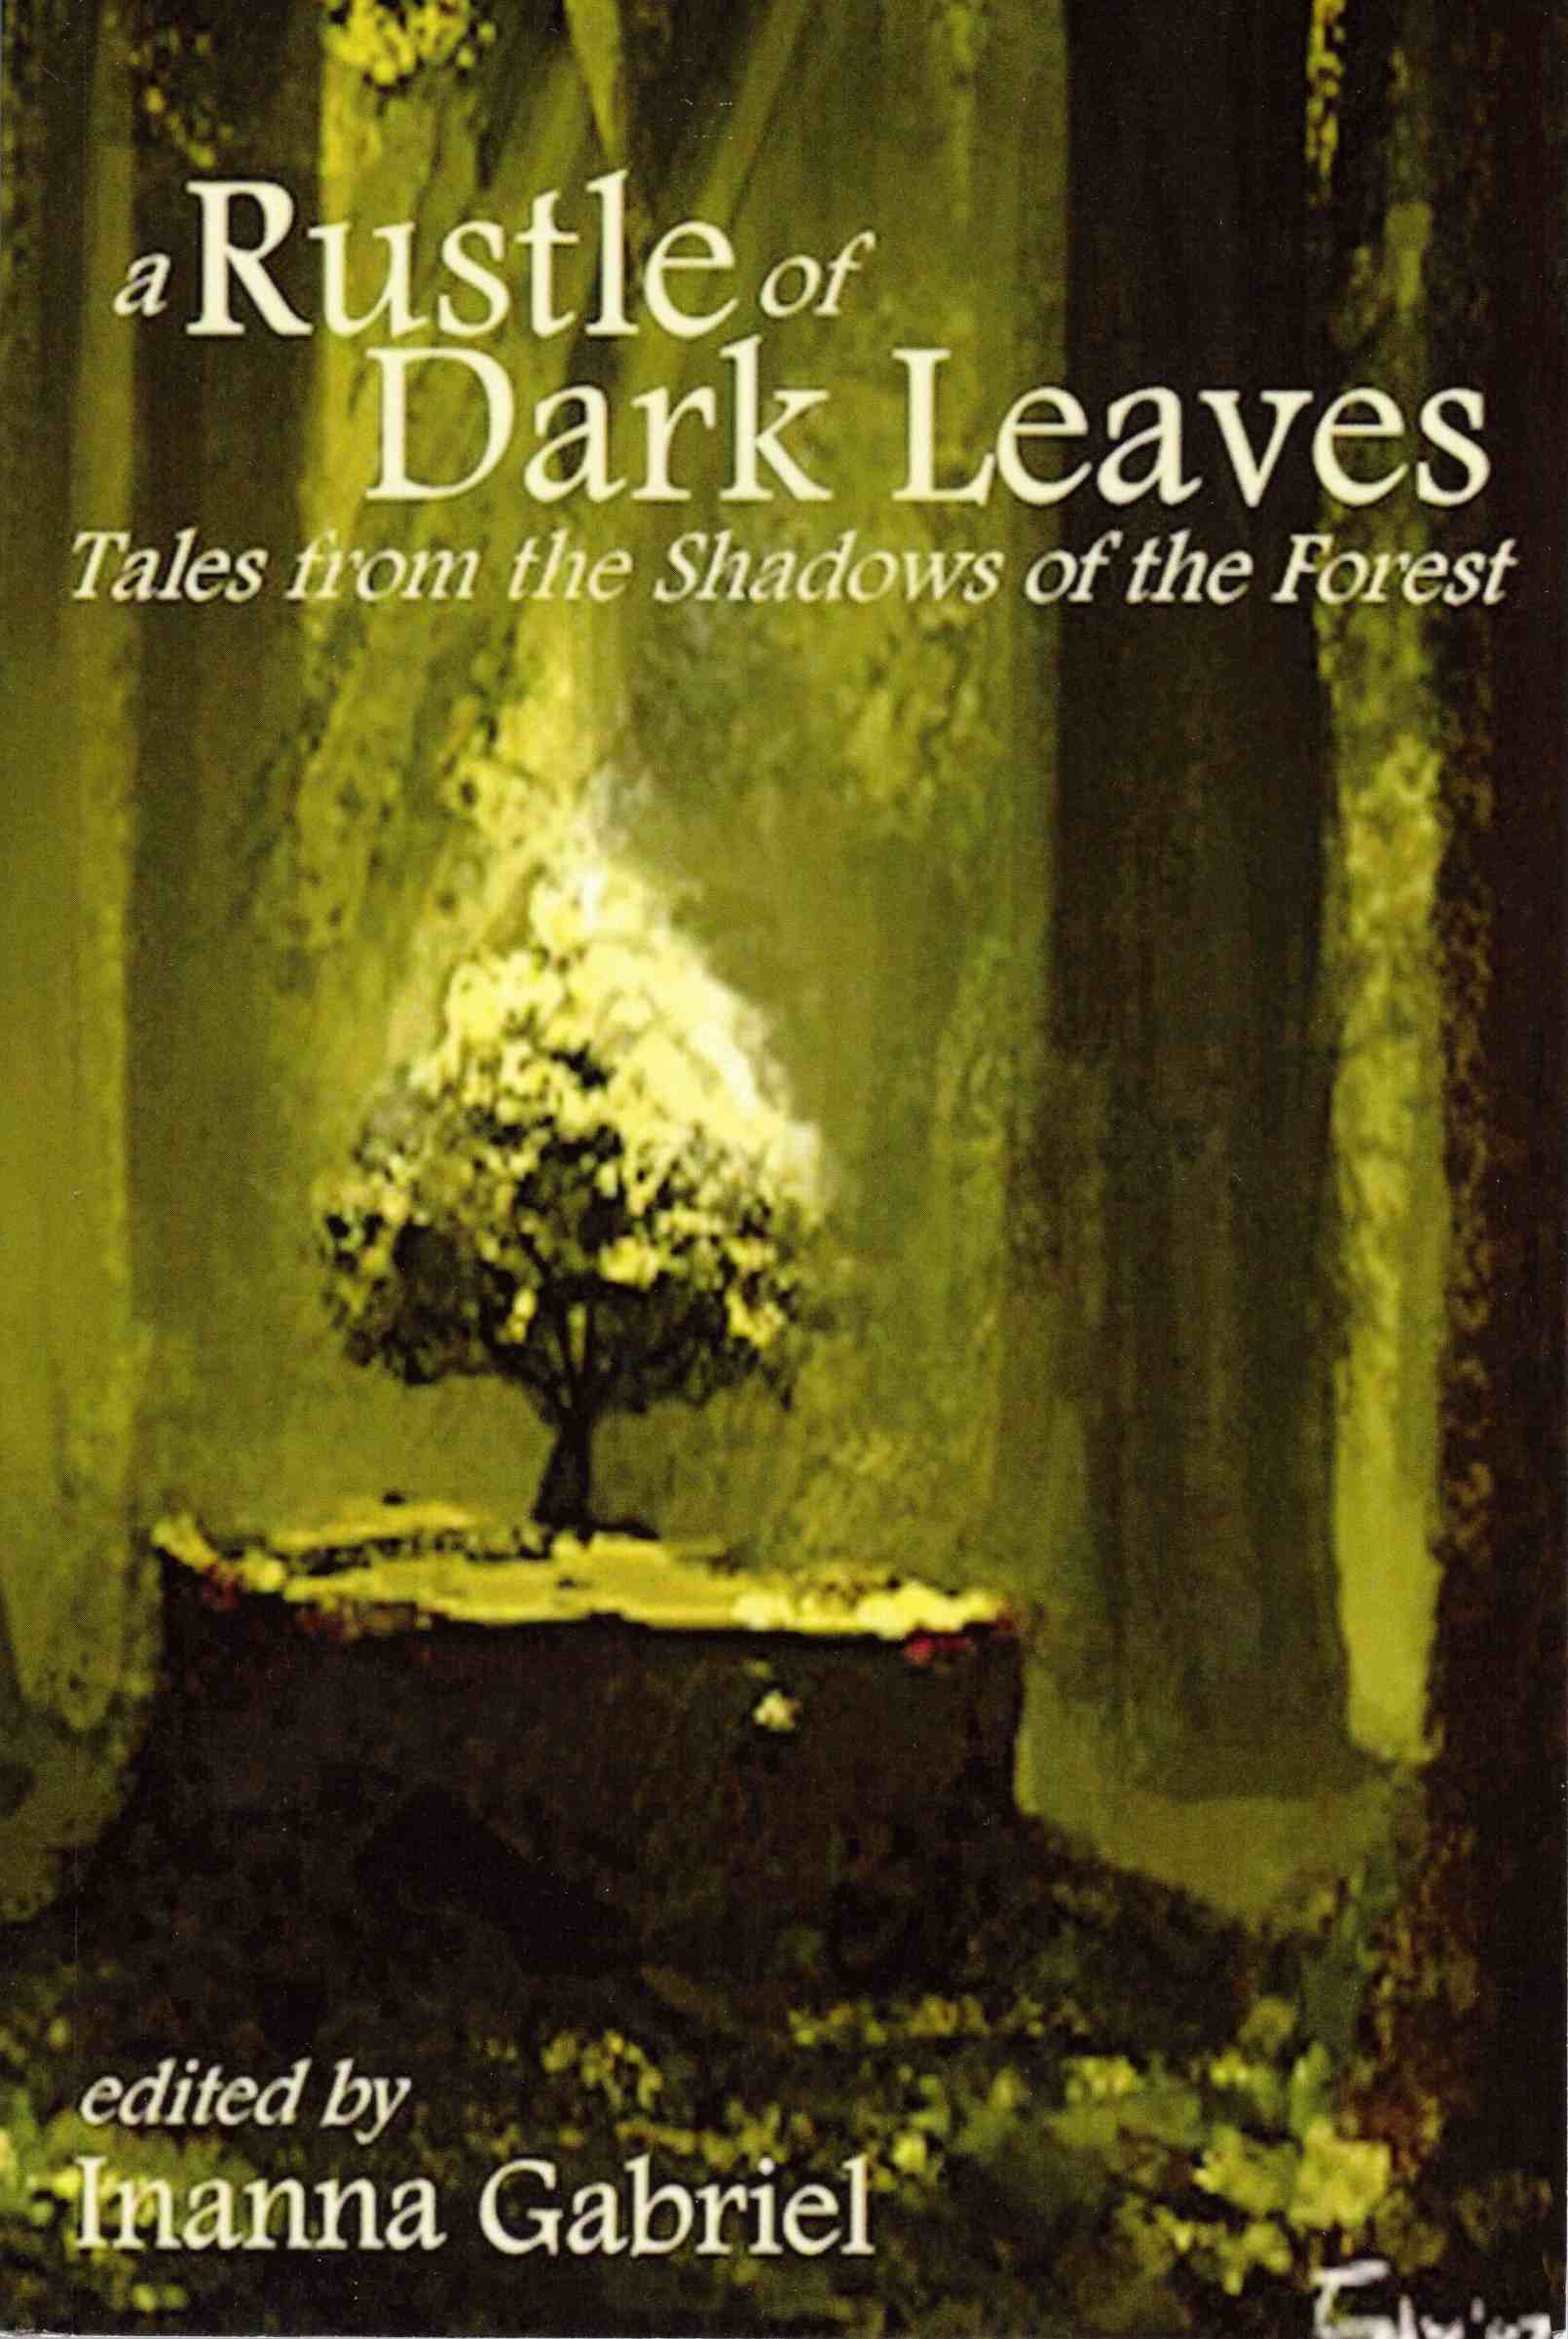 A Rustle of Dark Leaves, edited by Inanna Gabriel. Featuring short fiction by Jenni Wiltz.